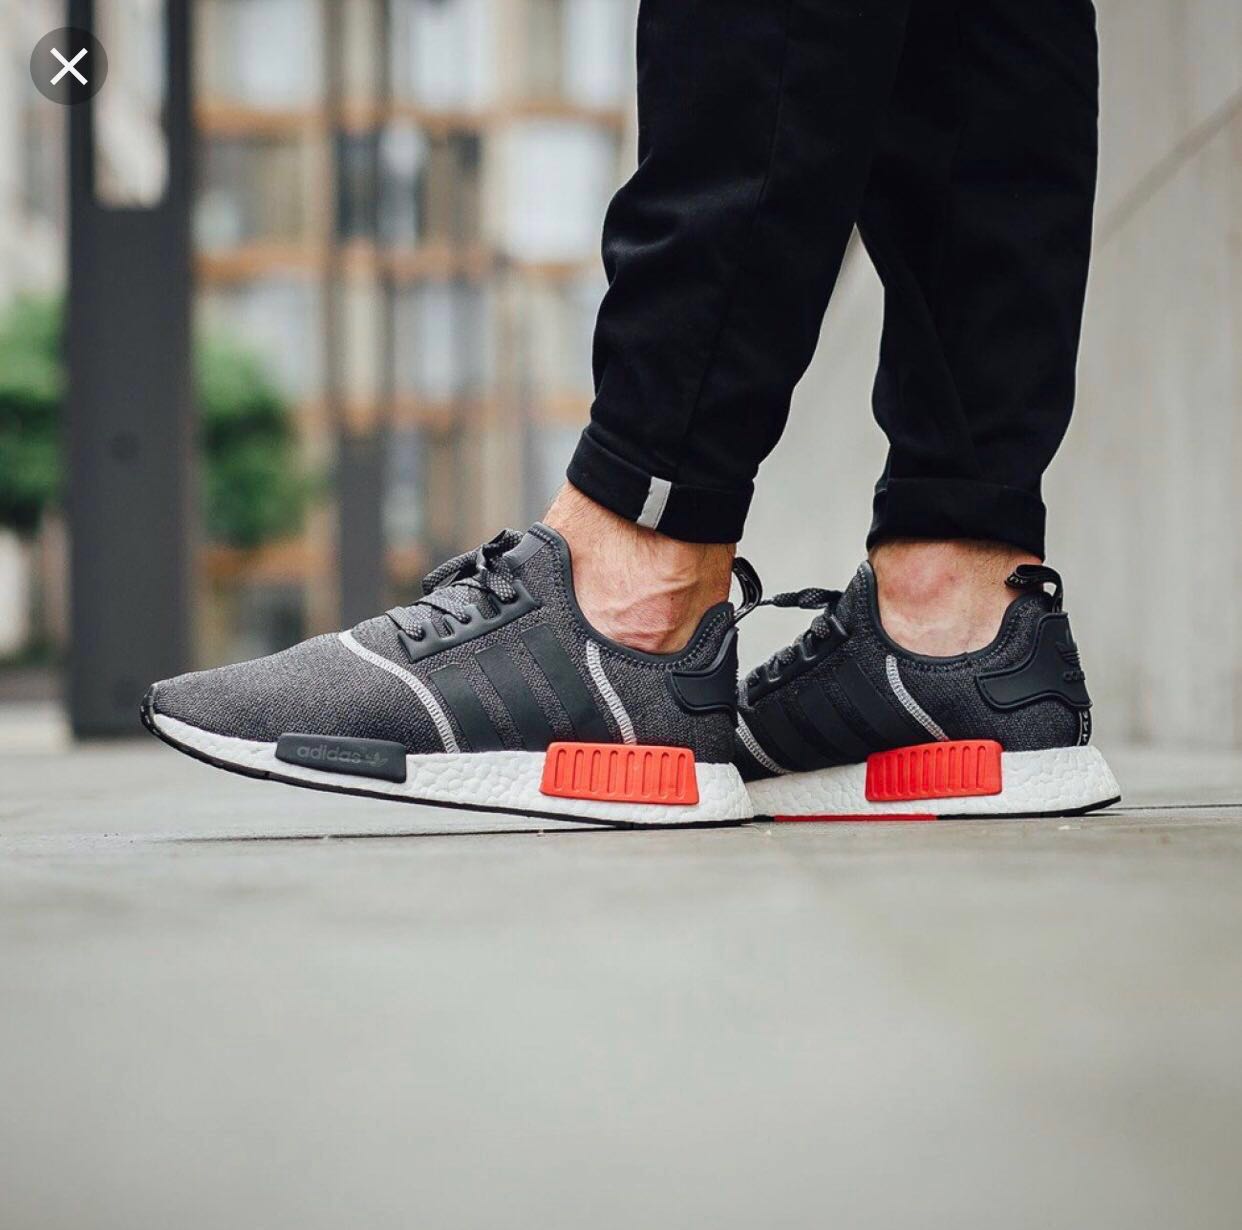 adidas grey red shoes